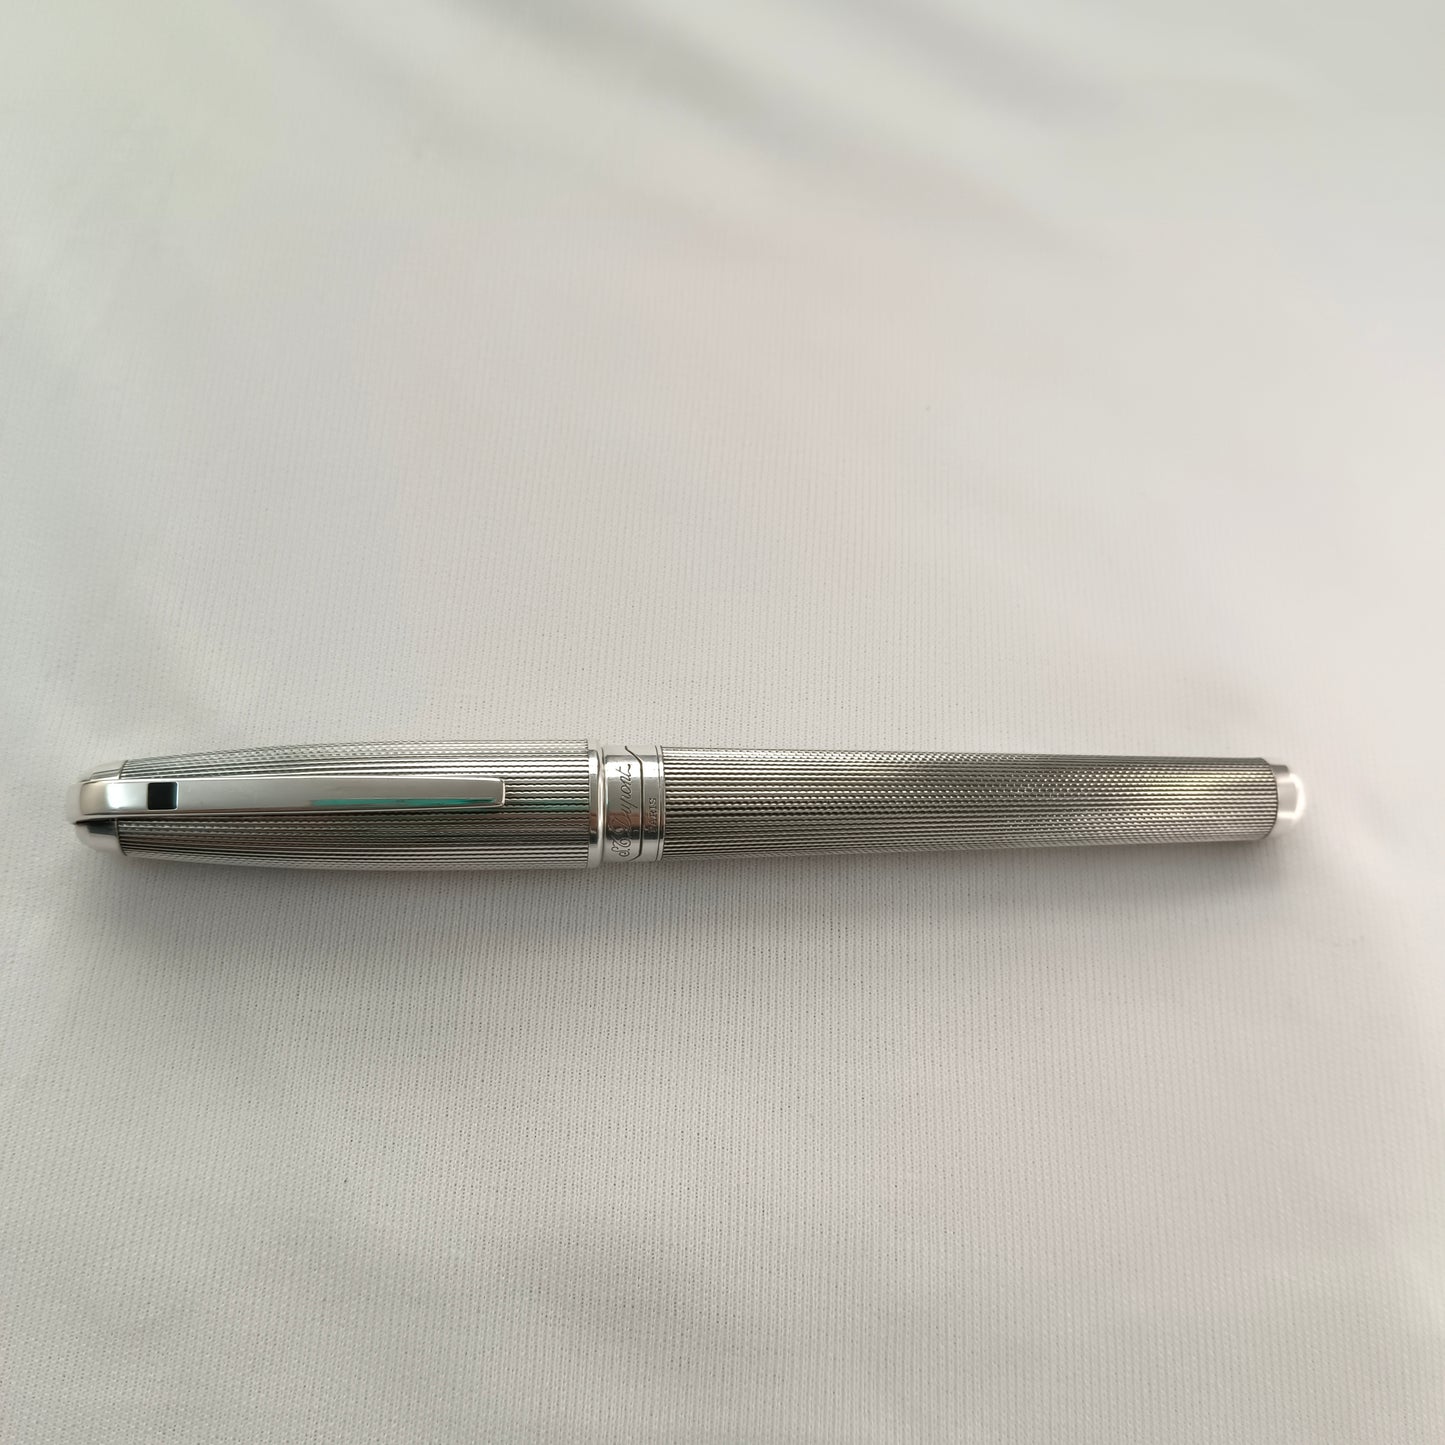 S.T. Dupont Orpheo Olympio 480101 Silver Plated Fountain Pen